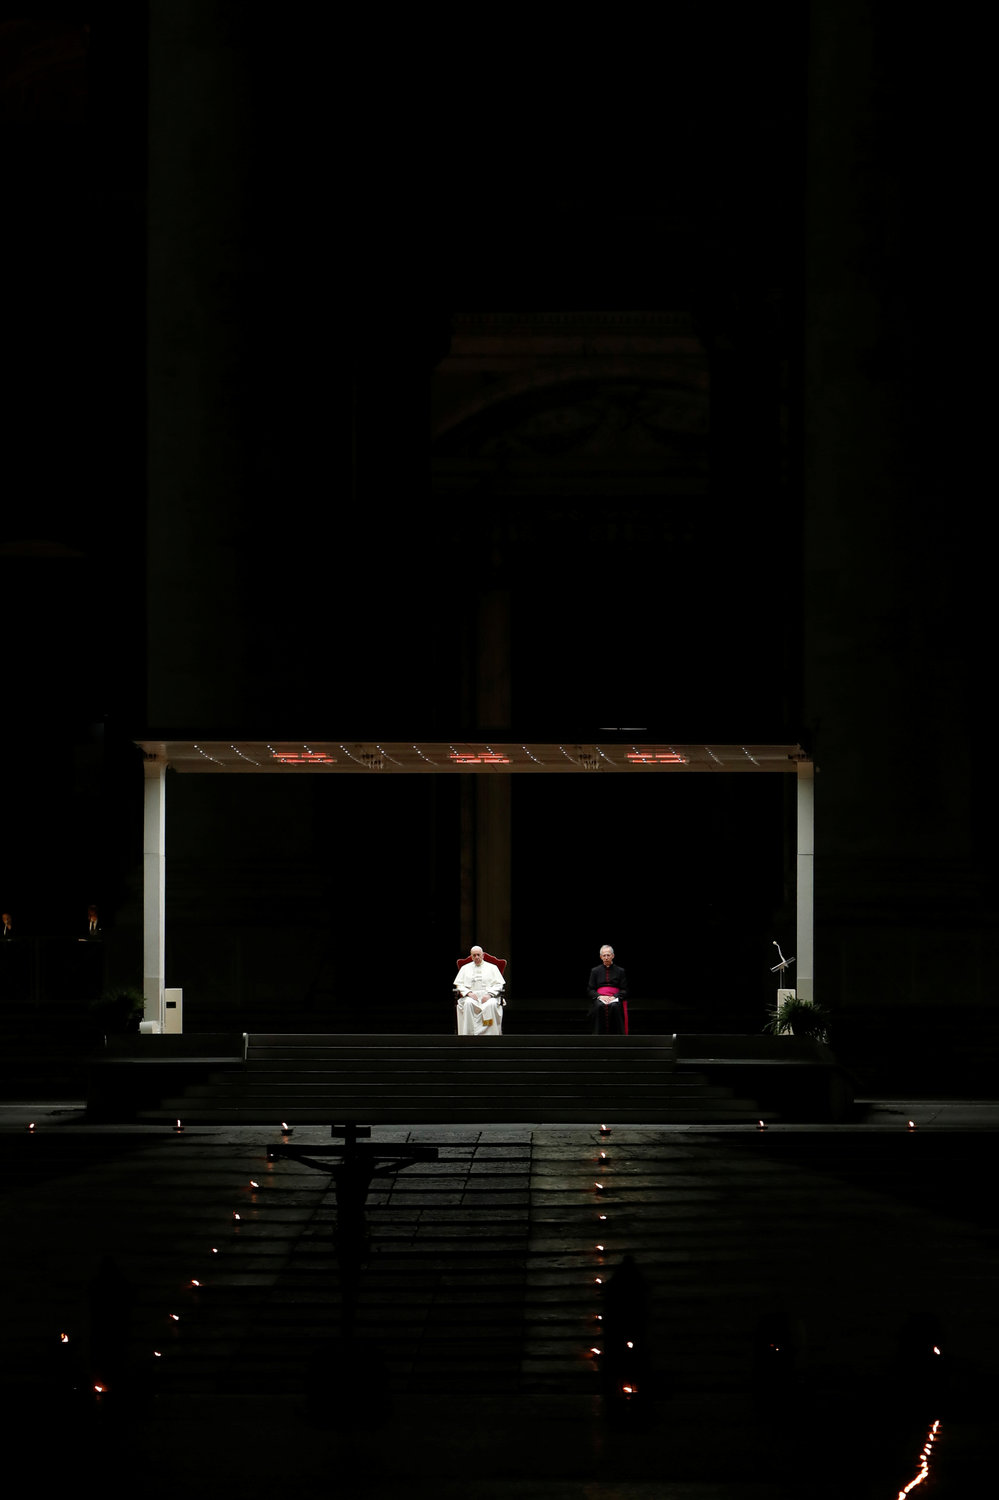 Workers light candles in St. Peter’s Square at the Vatican April 10, 2020, before the Via Crucis procession led by Pope Francis. The Good Friday service was held with no public participation because of the COVID-19 pandemic.